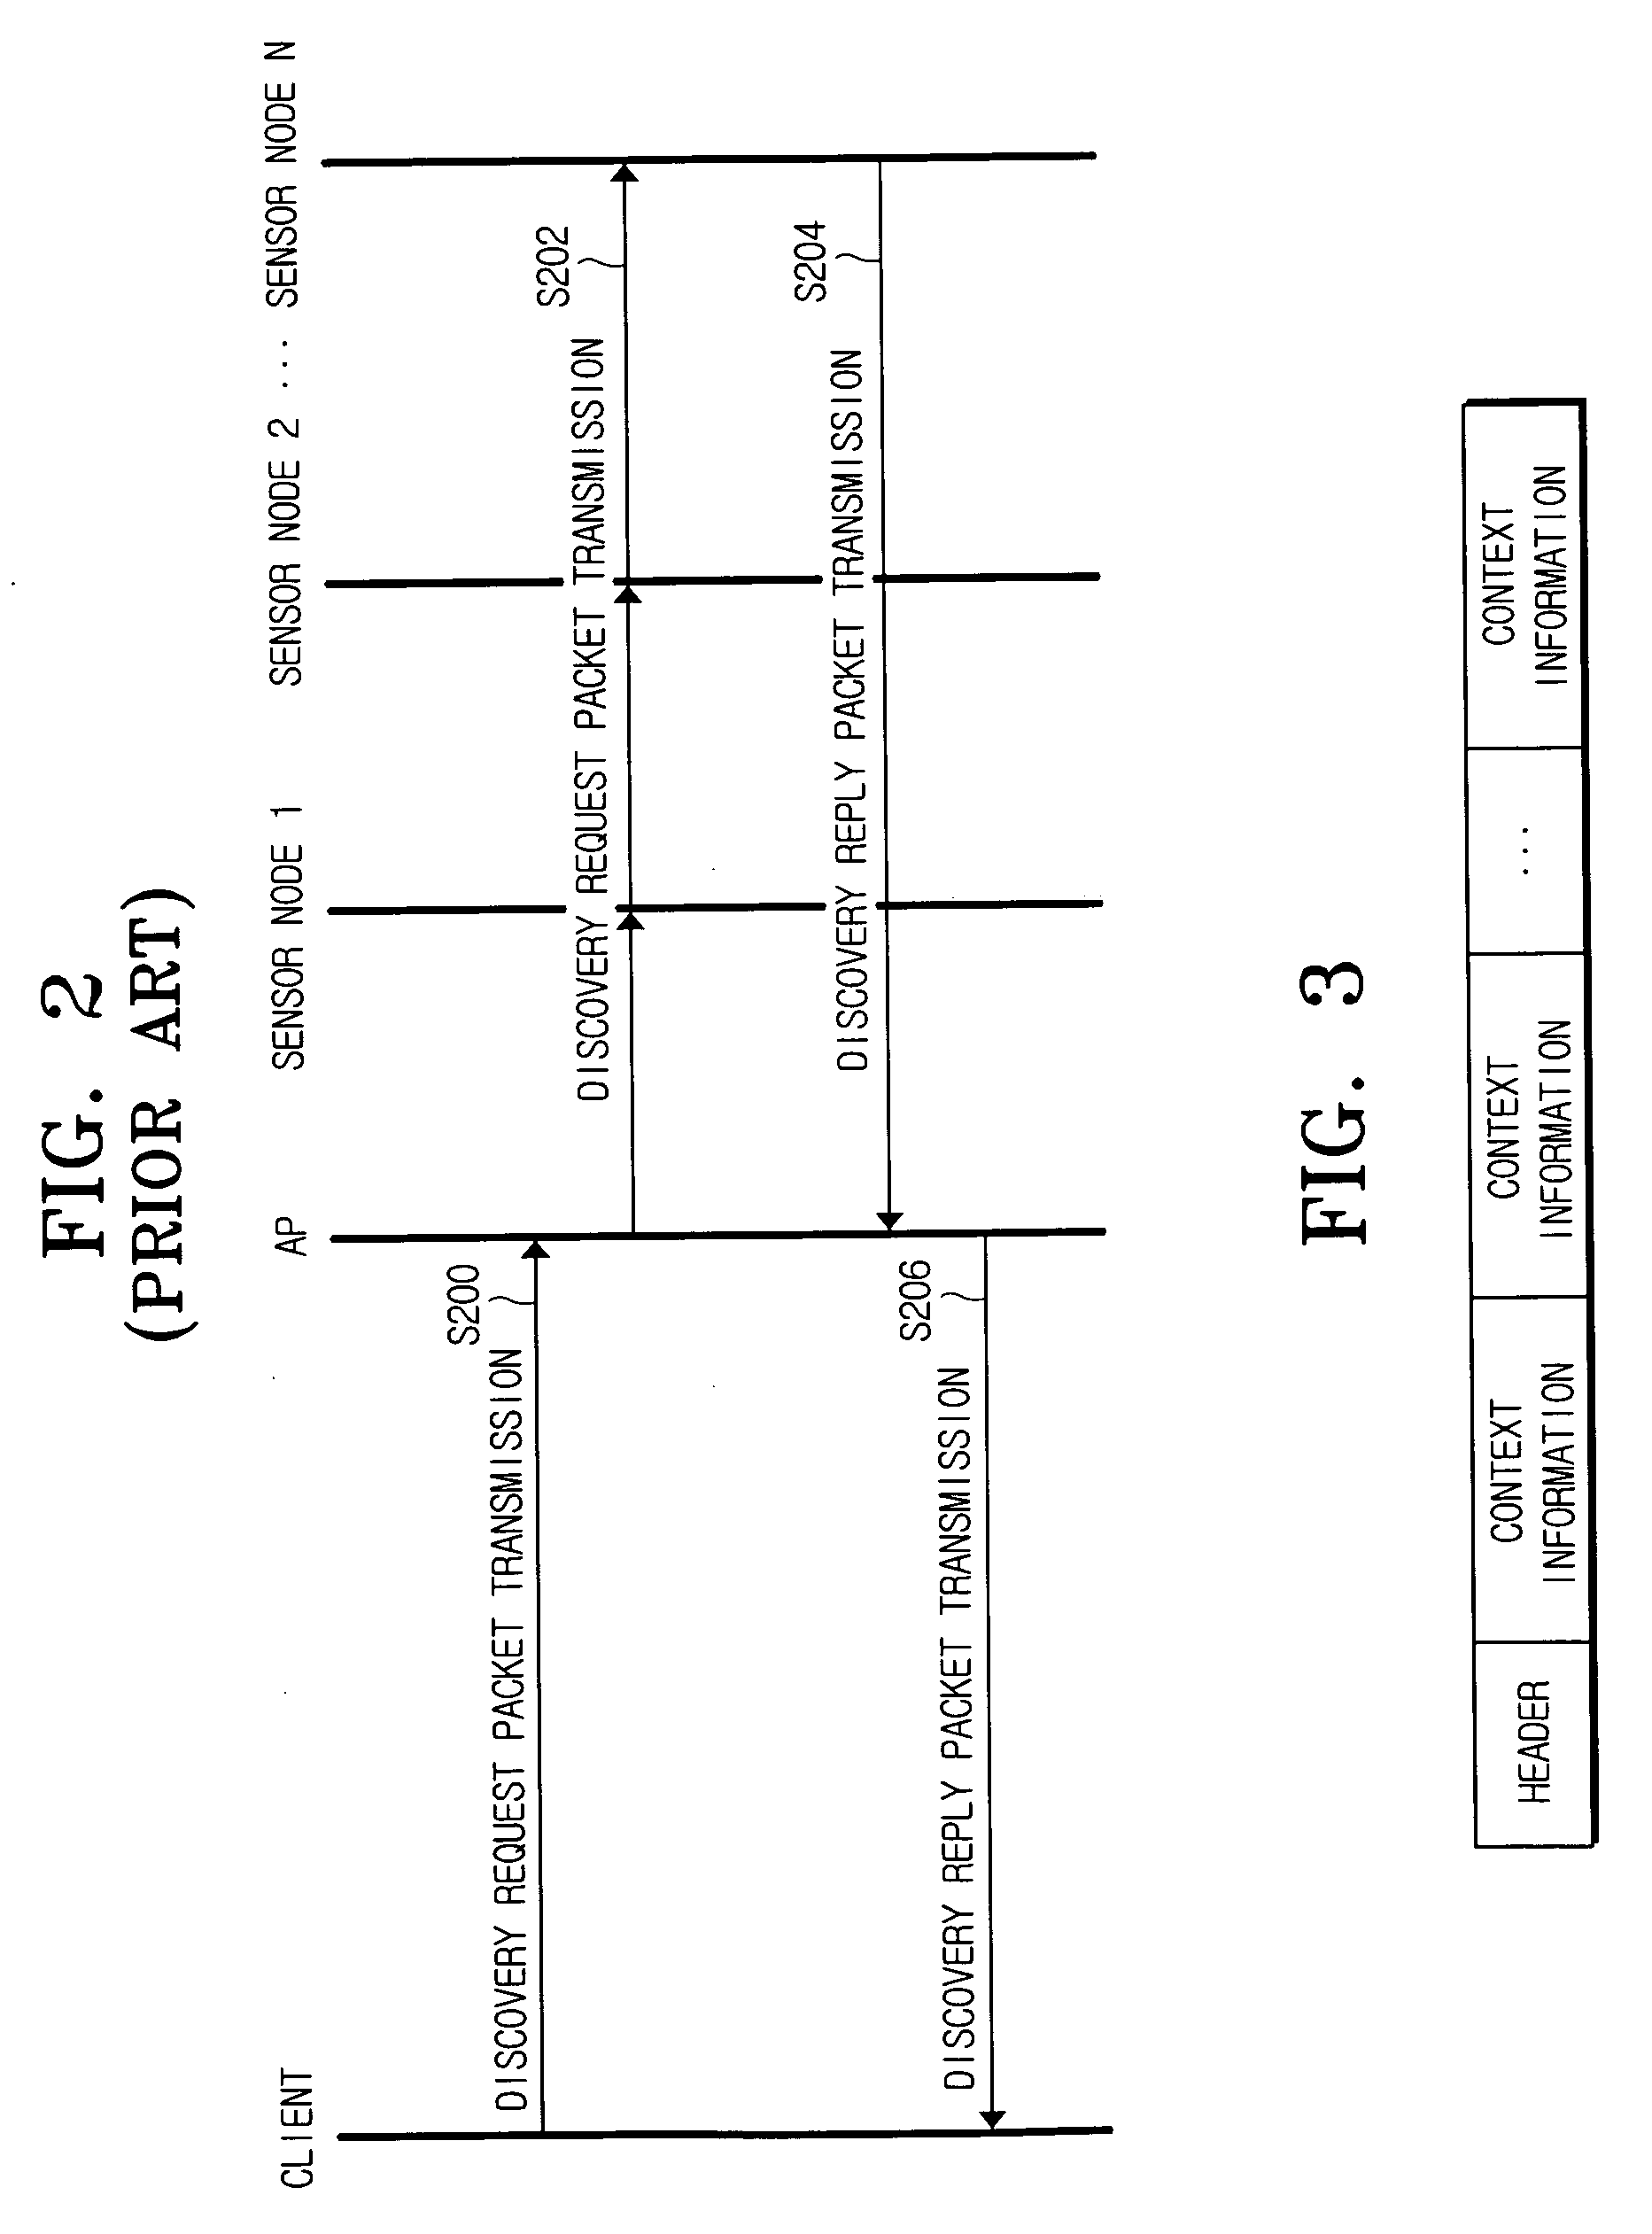 Method for discovery reply packet transmission in communication network